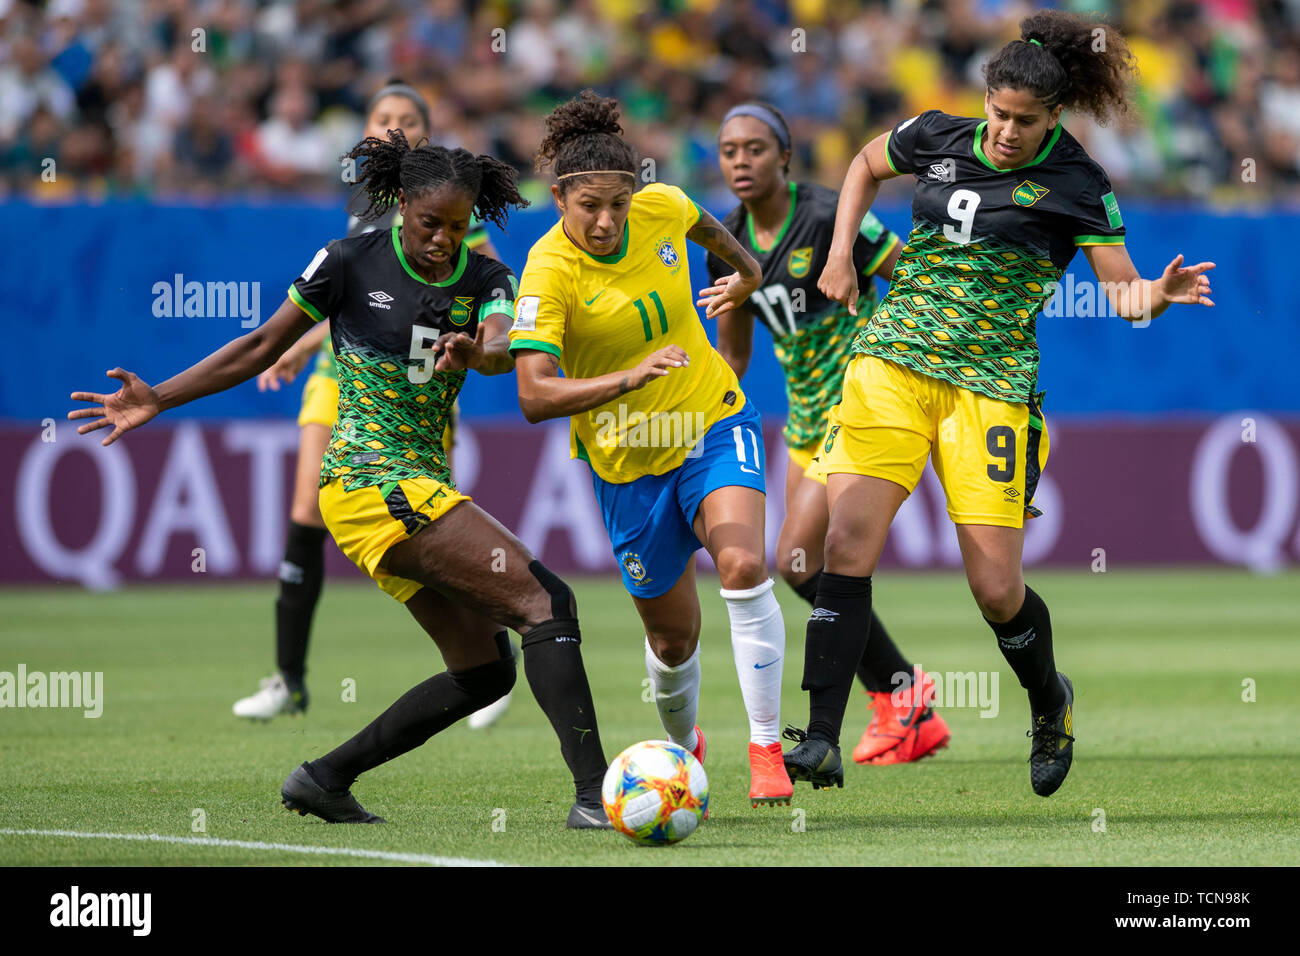 Grenoble, France. 09th June, 2019. BRAZIL VS. JAMAICA - Cristiane from Brazil during a match between Brazil and Jamaica, valid for the 2019 FIFA Women&#39;s World Cup, held on Sunday, June 9, 2019, at the Stade des Alpes Stadium in Grenoble, Fr. Credit: Foto Arena LTDA/Alamy Live News Stock Photo